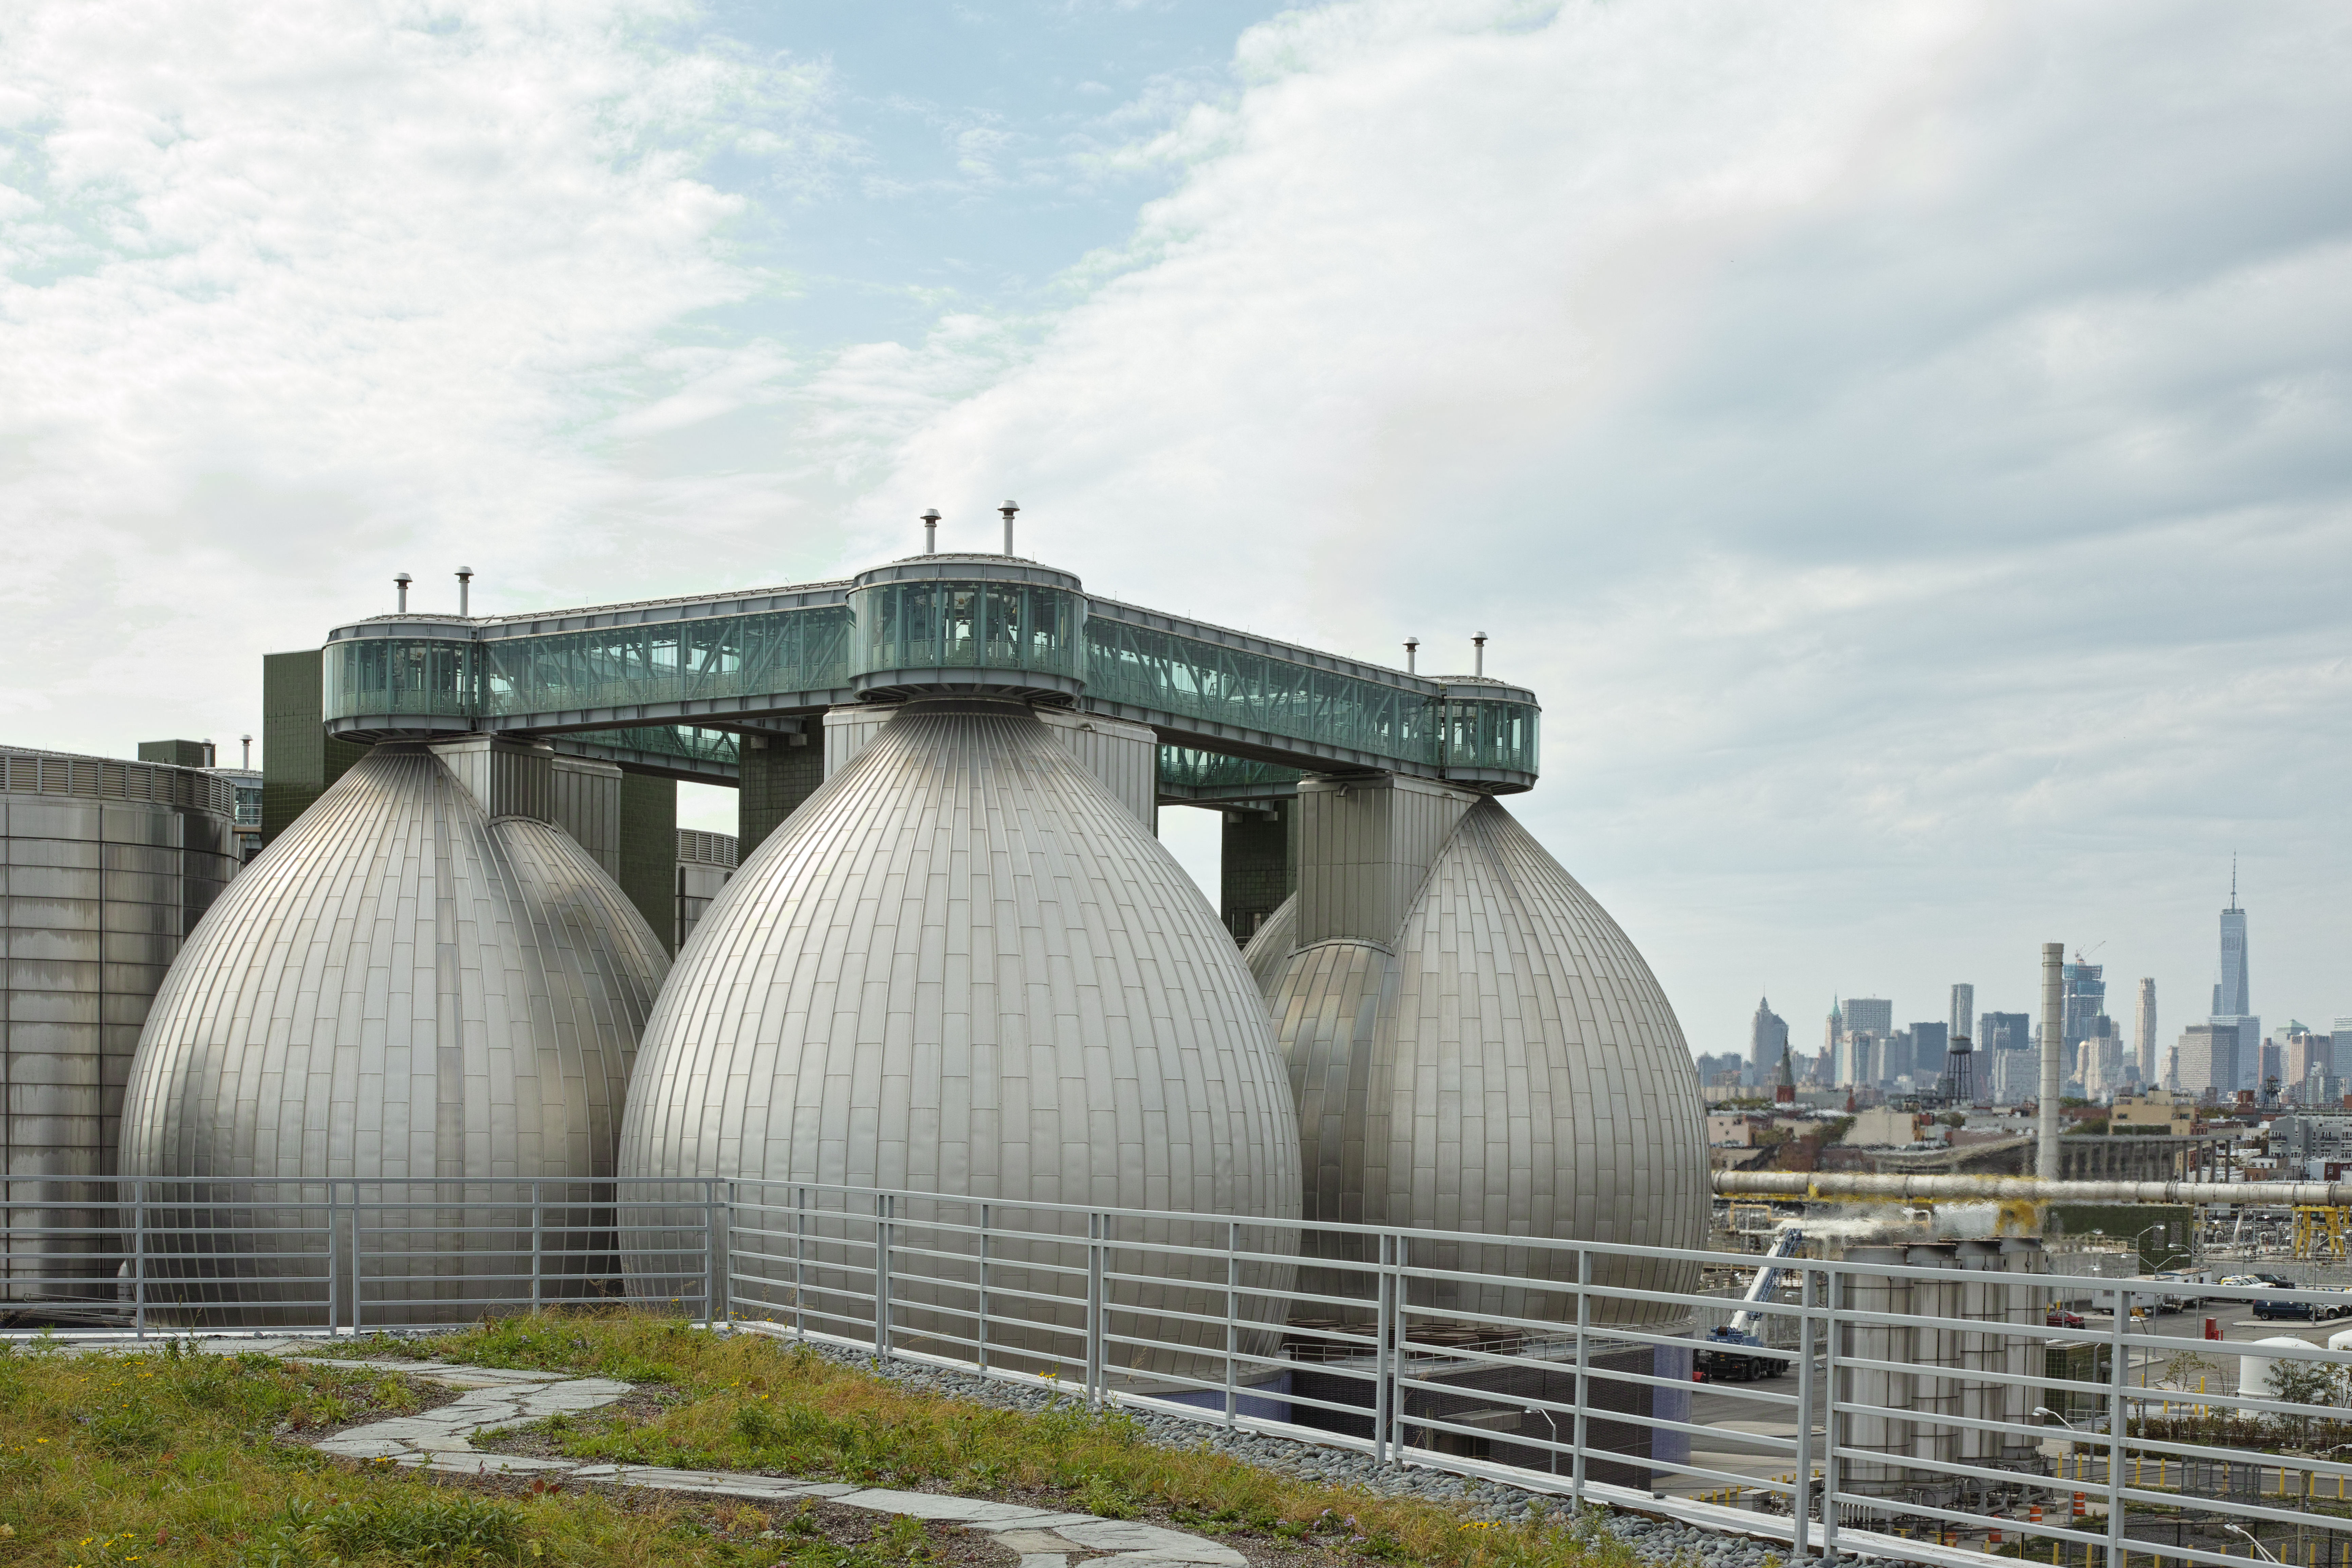 Digesters at a wastewater treatment plant